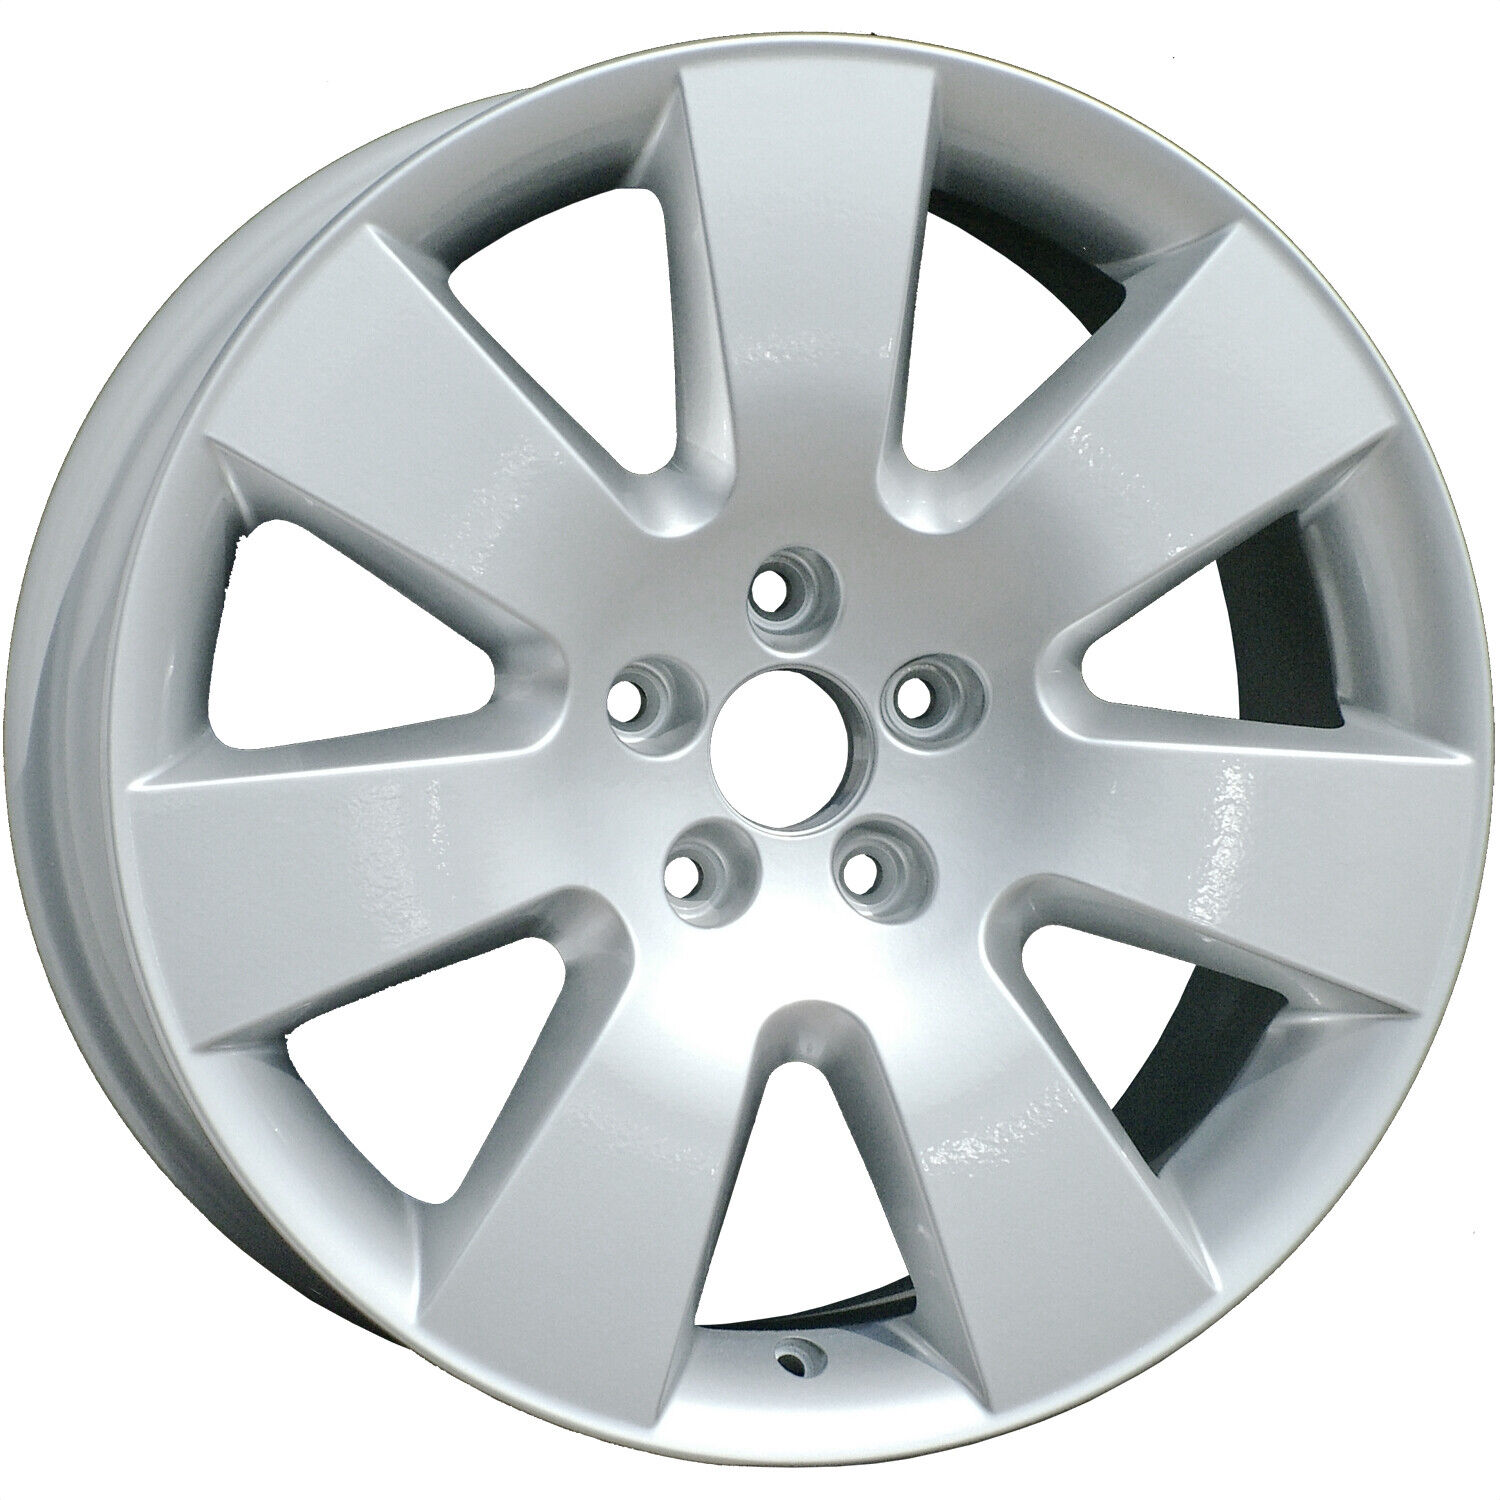 Refurbished Painted Silver Aluminum Wheel 18 x 8 4F0601025D8Z8